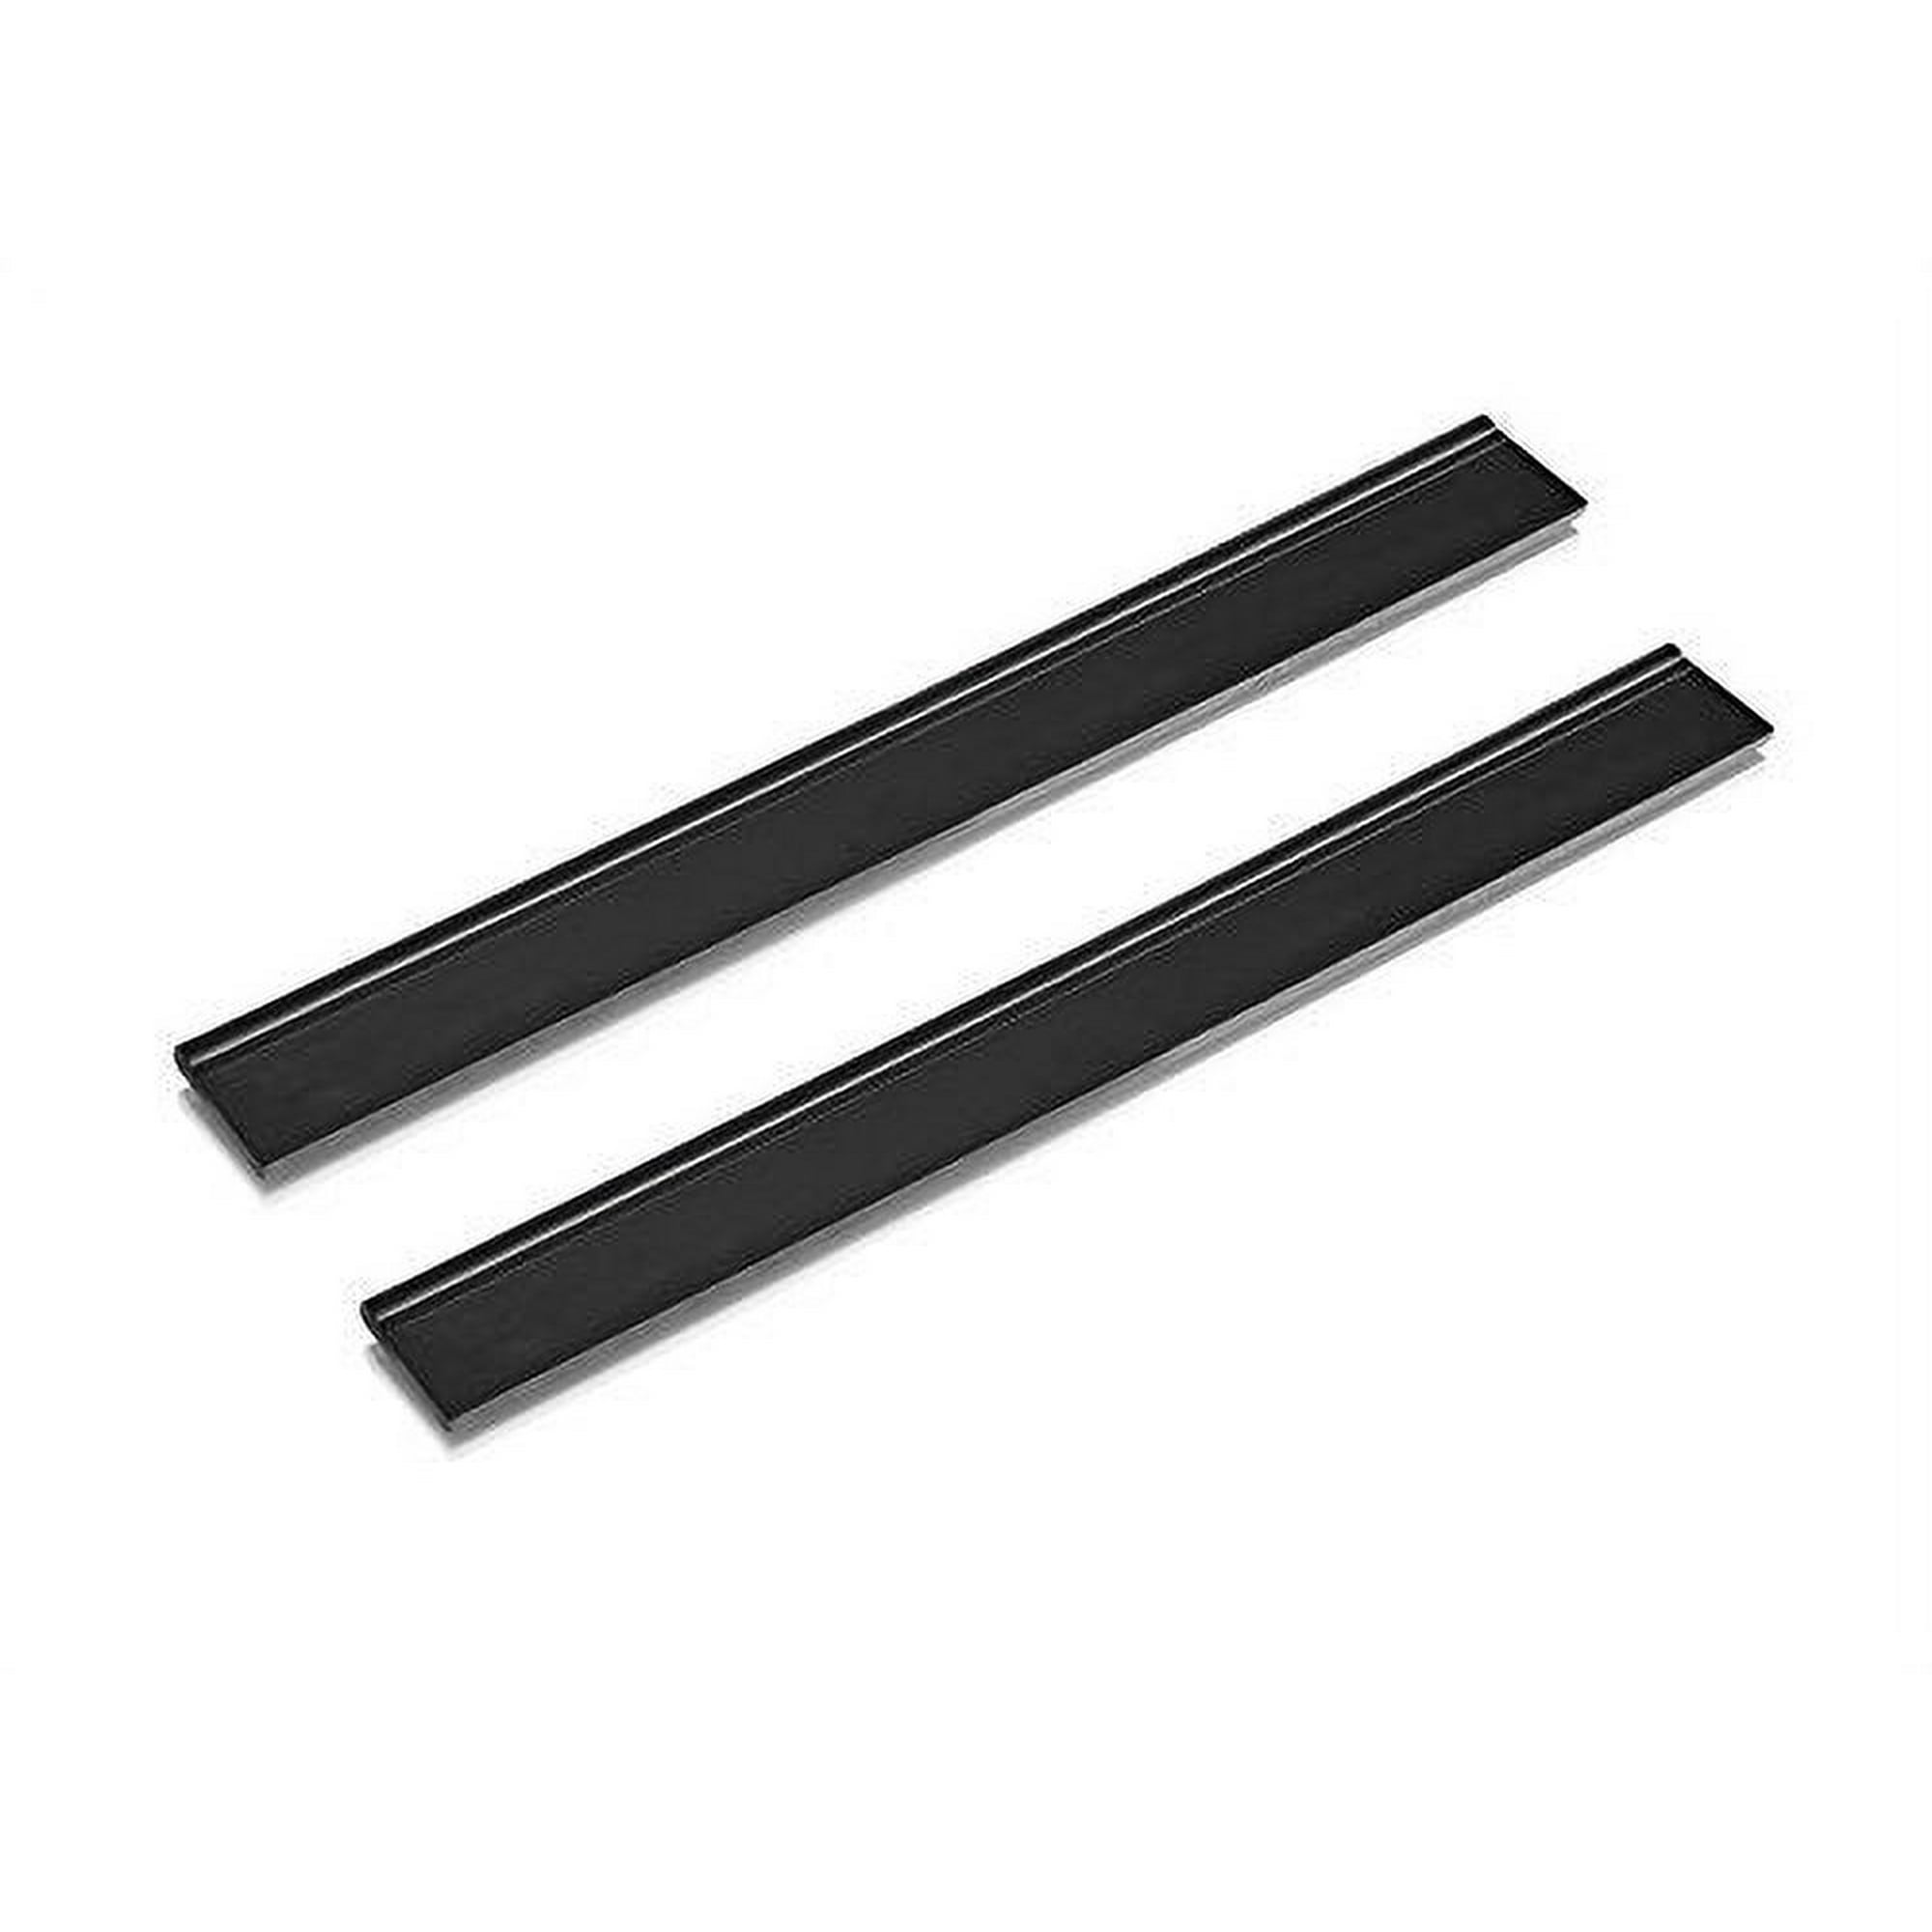 Karcher WV 1 Window Vacuum Replacement Squeegee Blades - 2 Pack